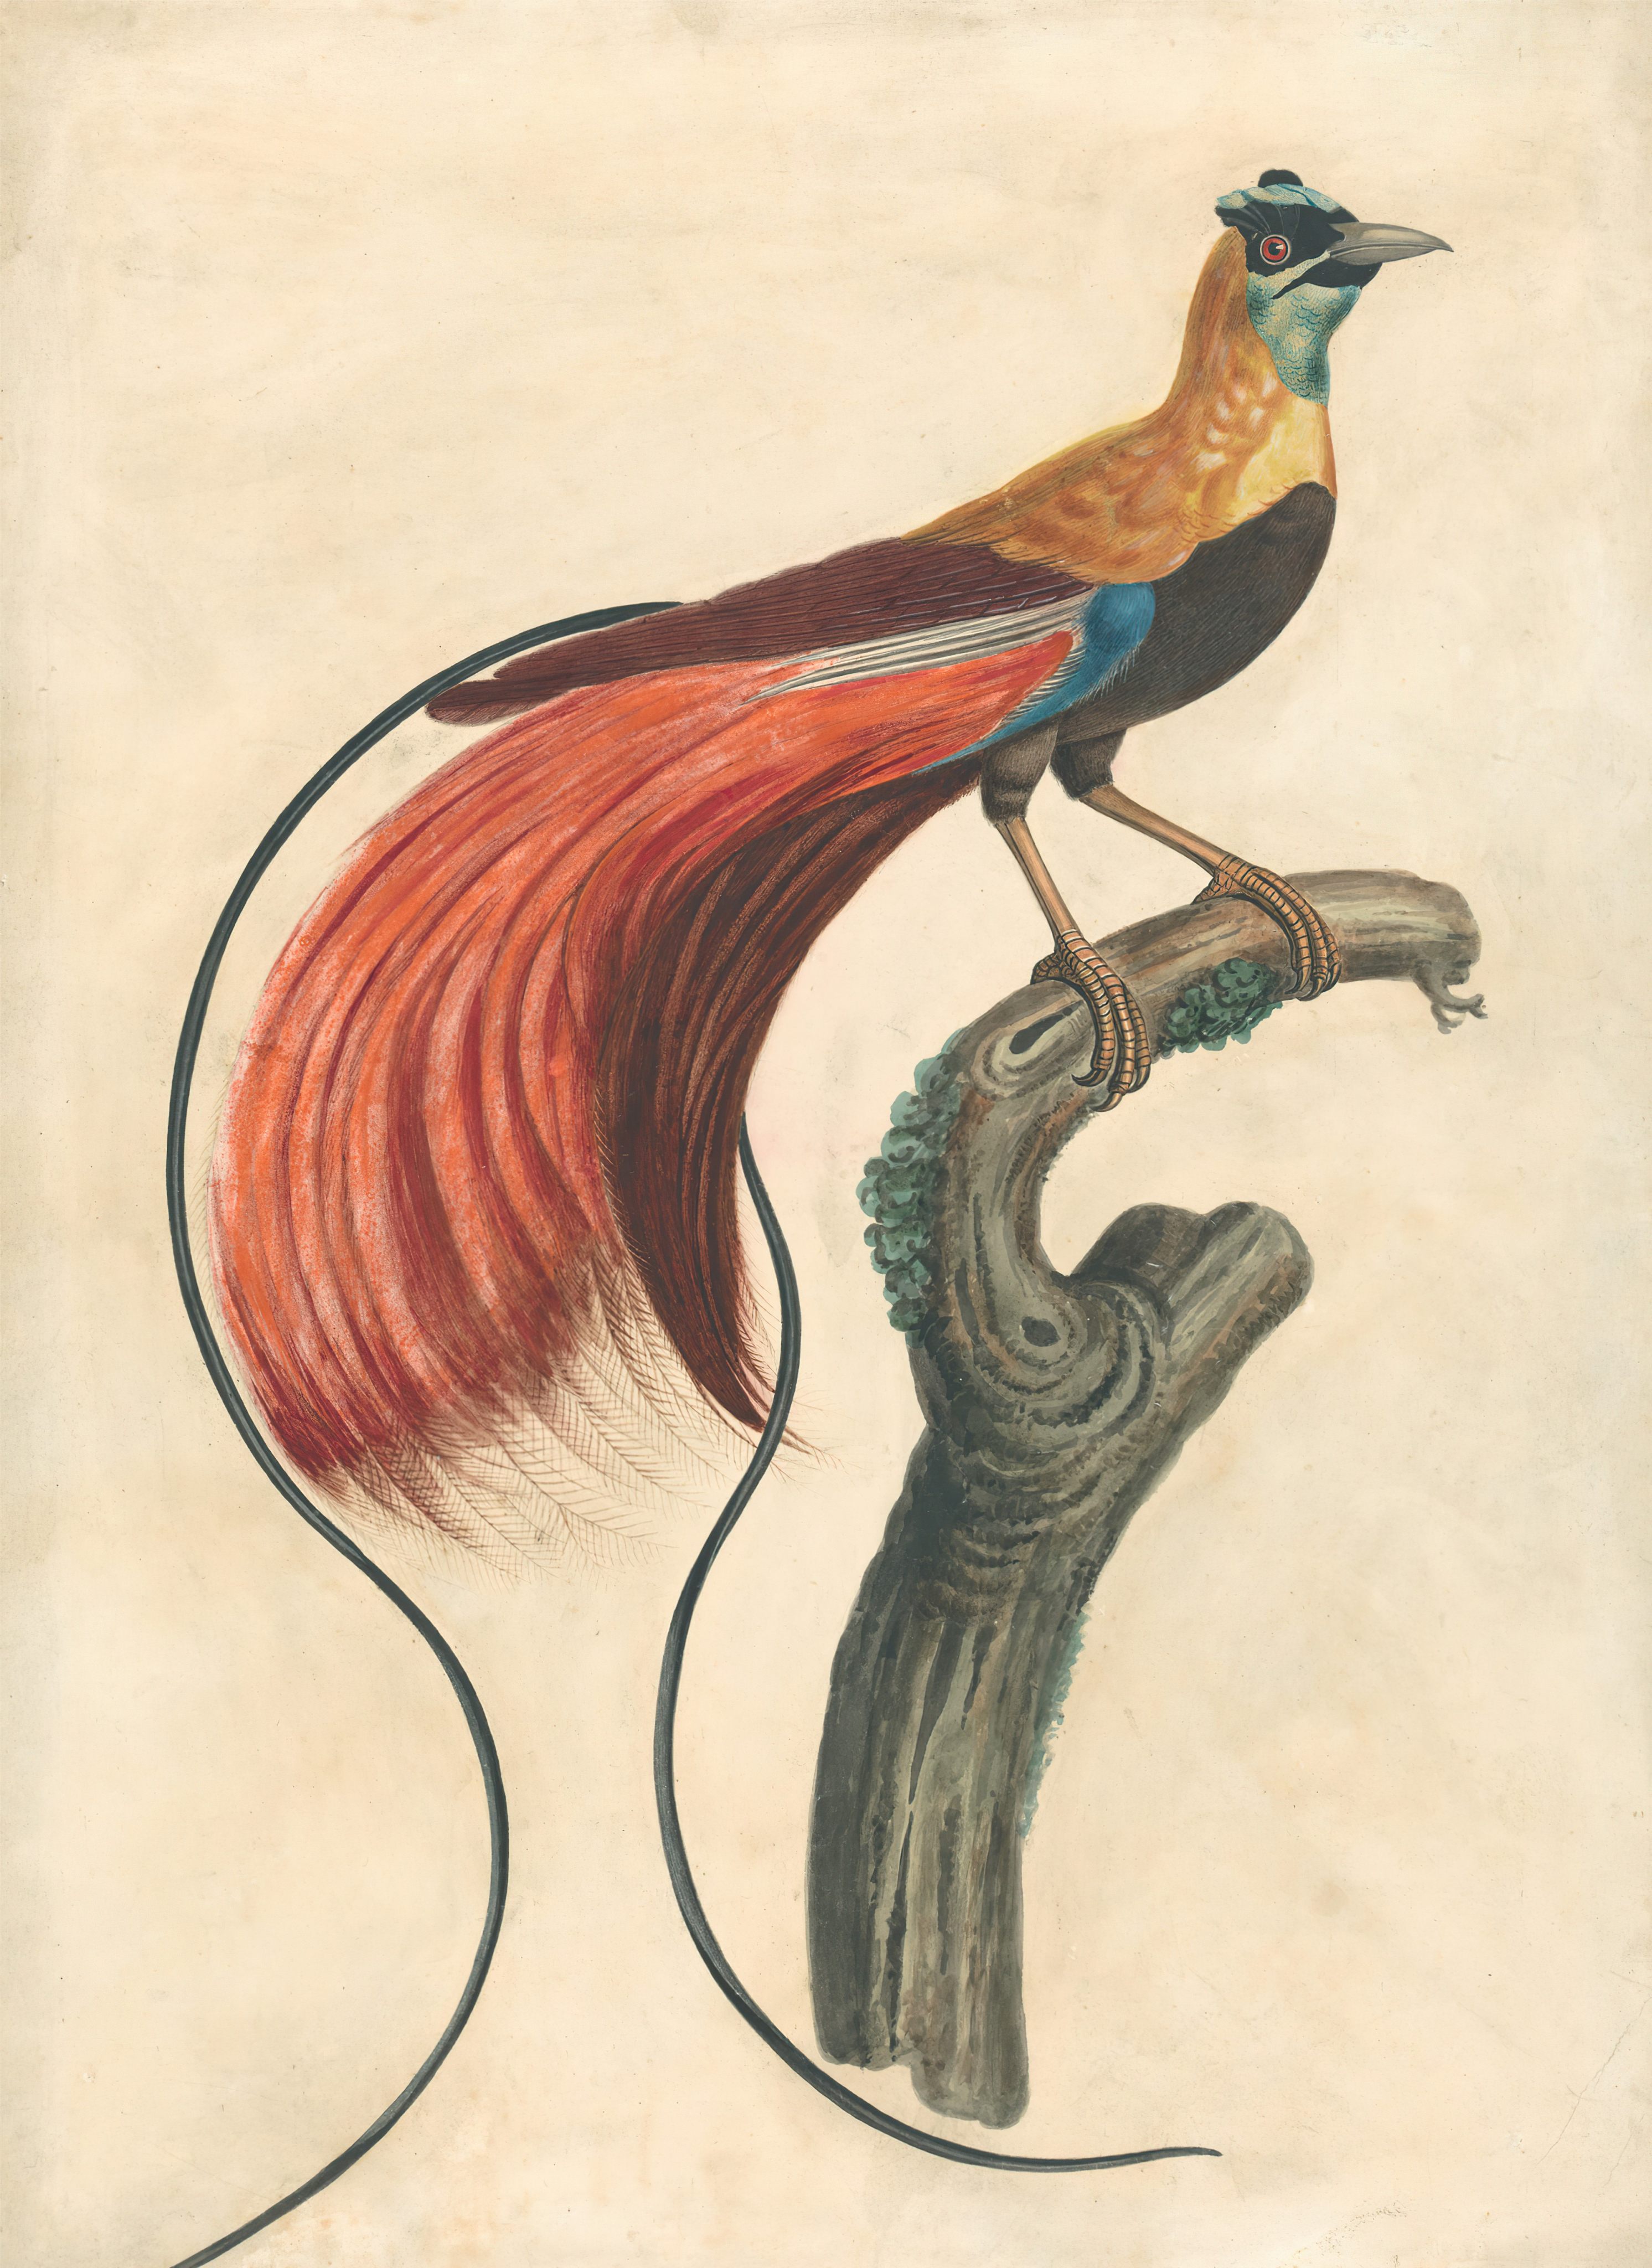 An 18th century watercolour of a red-plumed bird of paradise from New Guinea. They had long been dismissed by European naturalists as mythological, but wealthy 19th century merchant Thomas Beale had several in his Macau aviary for visitors to admire. Photo: Getty Images